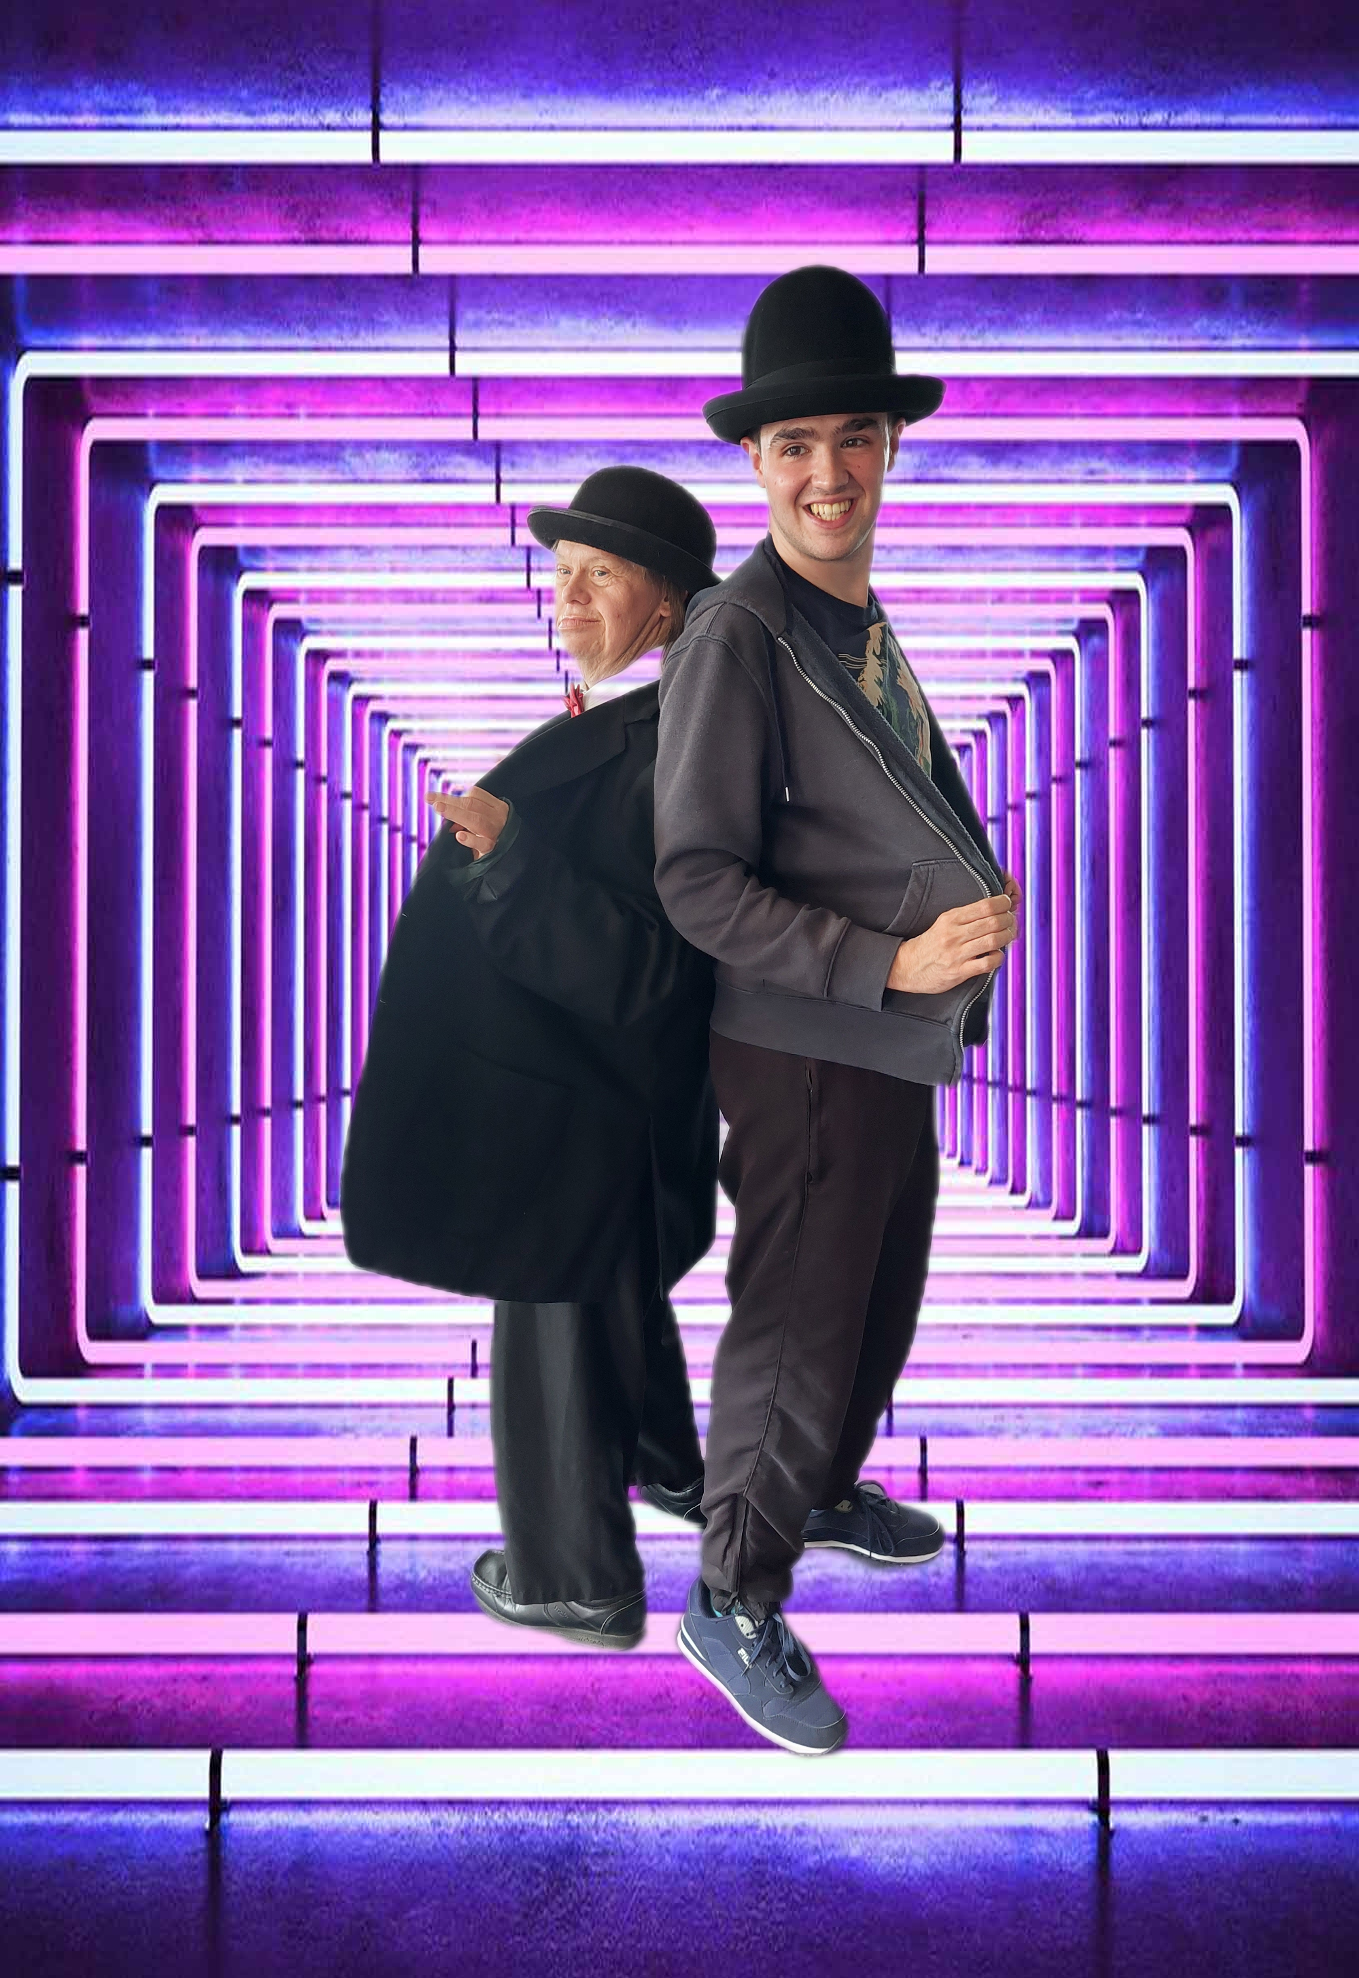 Actors dressed as Laurel and Hardy with a neon tunnel in background